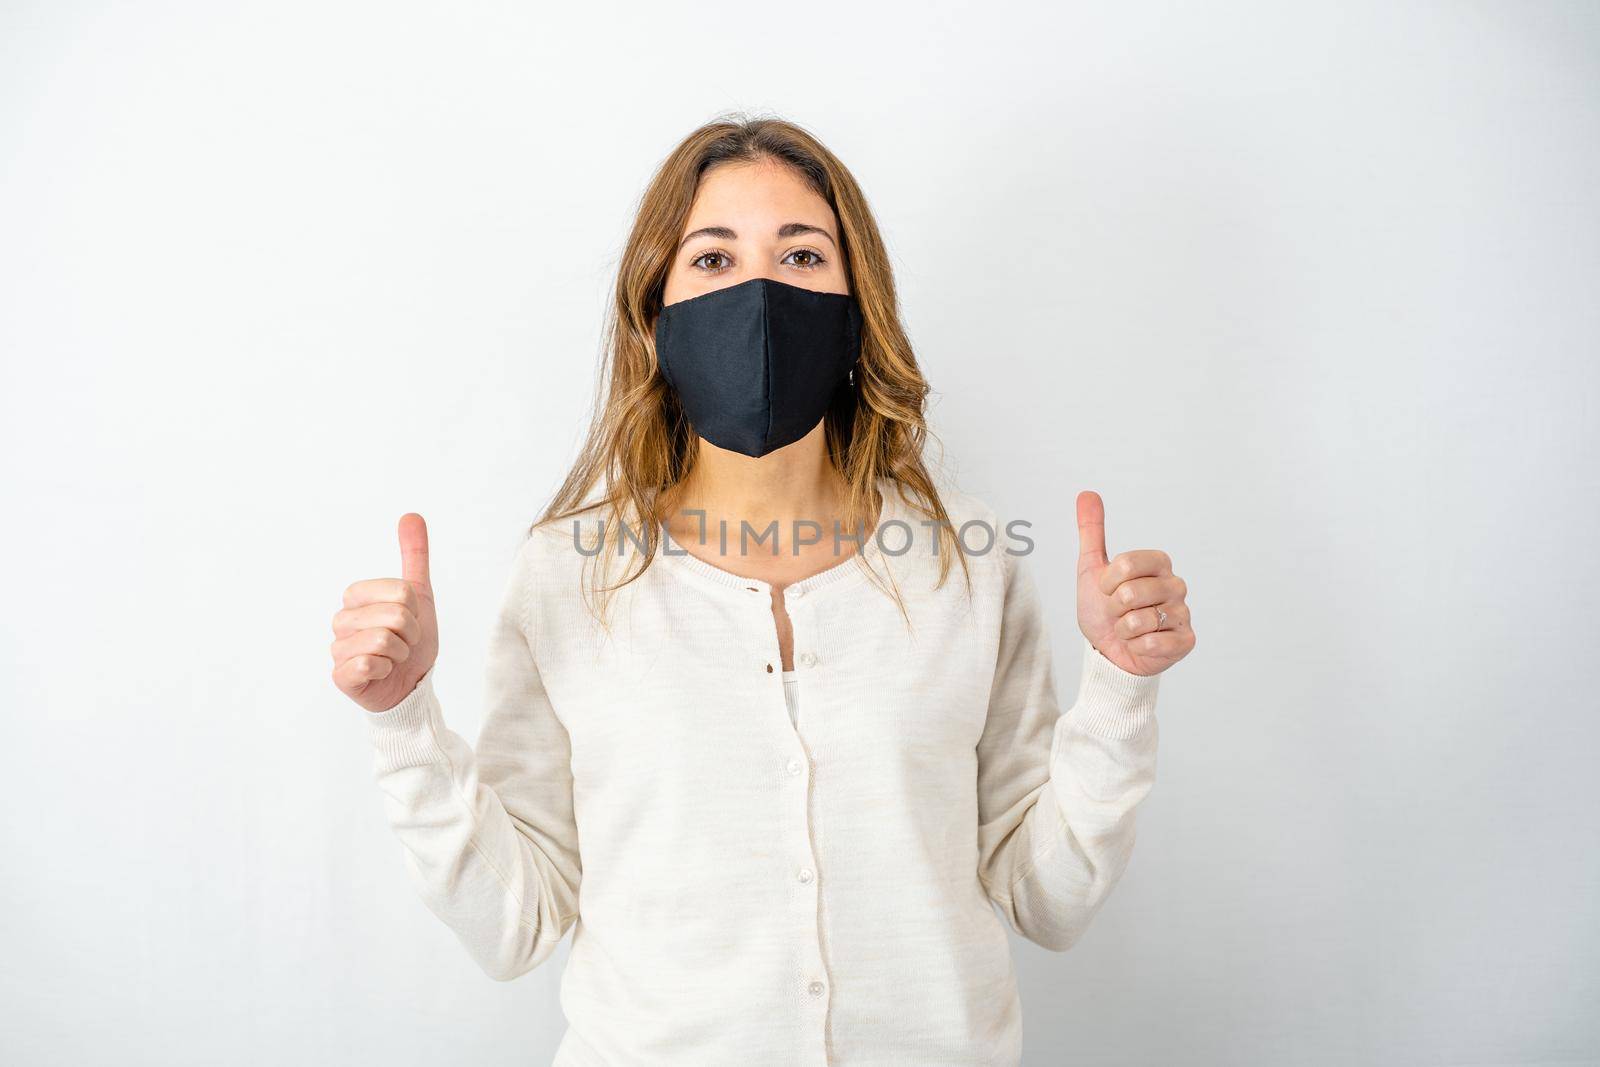 Studio shot of Caucasian confident young woman show hands with thumbs-up gesture wearing Coronavirus protective mask on white background. Concept of thinking positive for the future due to Covid-19 by robbyfontanesi